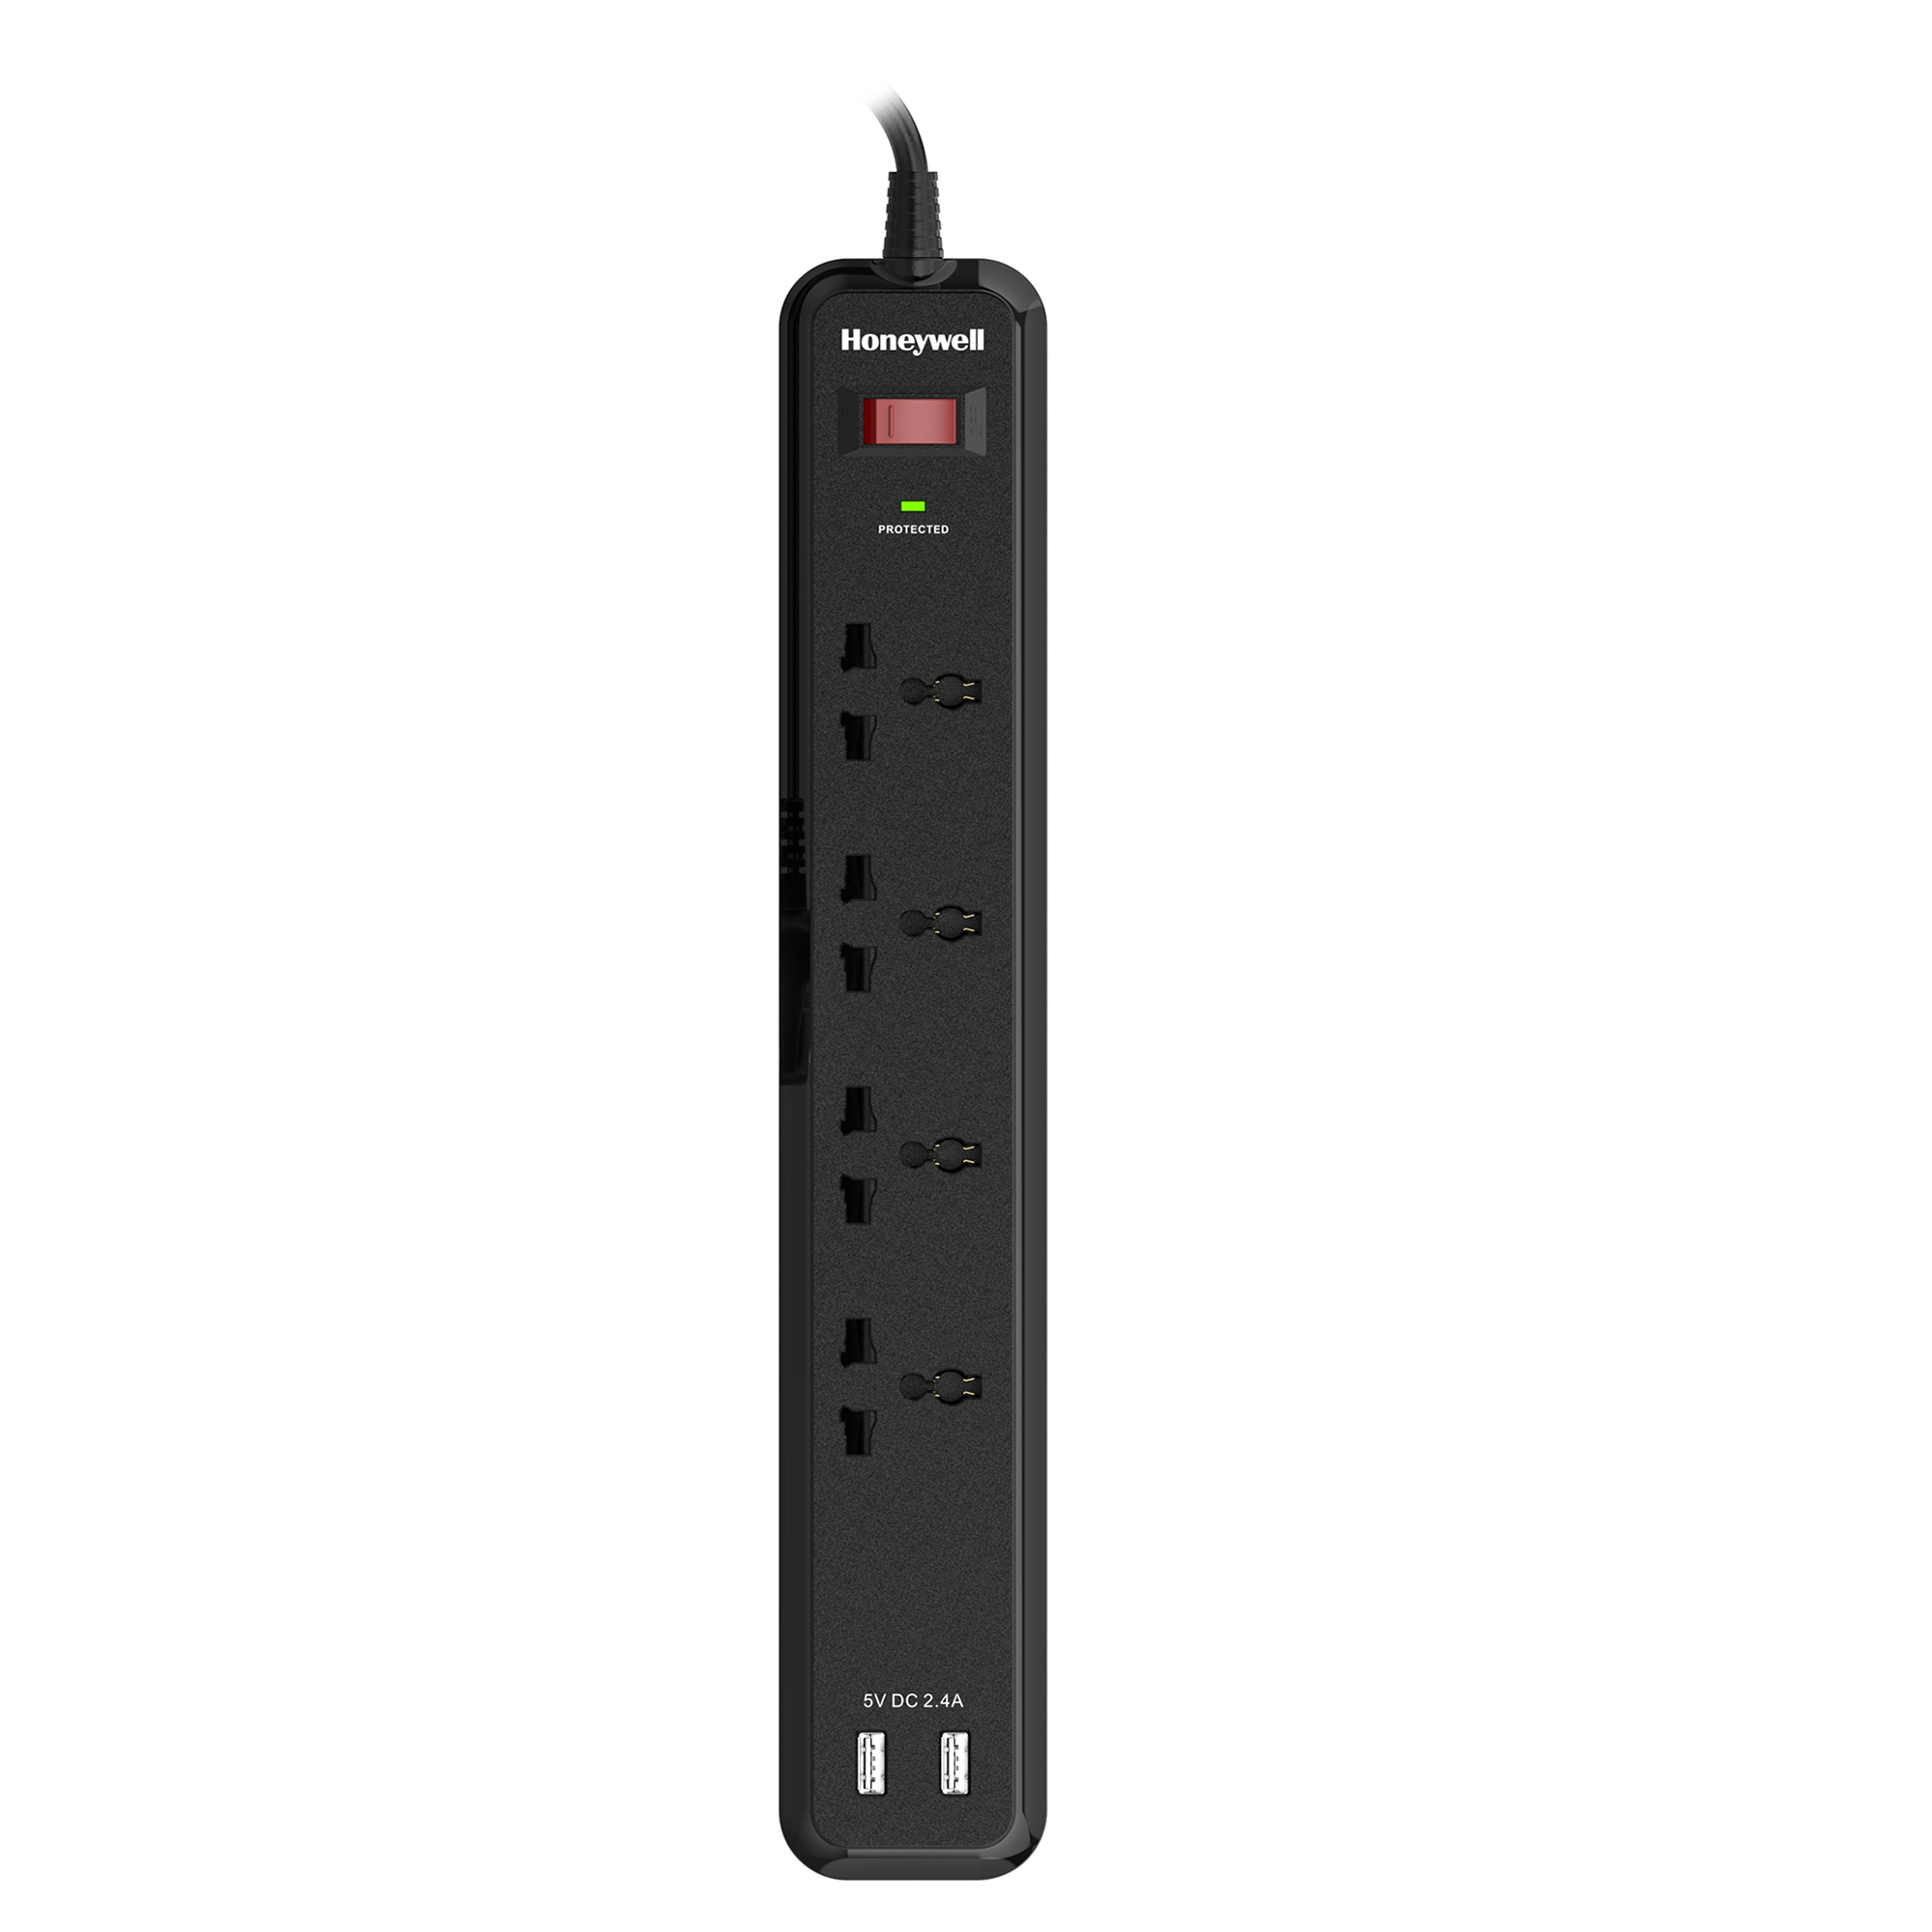 Honeywell Surge Protector with 4 Universal Sockets + 2 USB-A Ports and 2 Meter Cord - Black